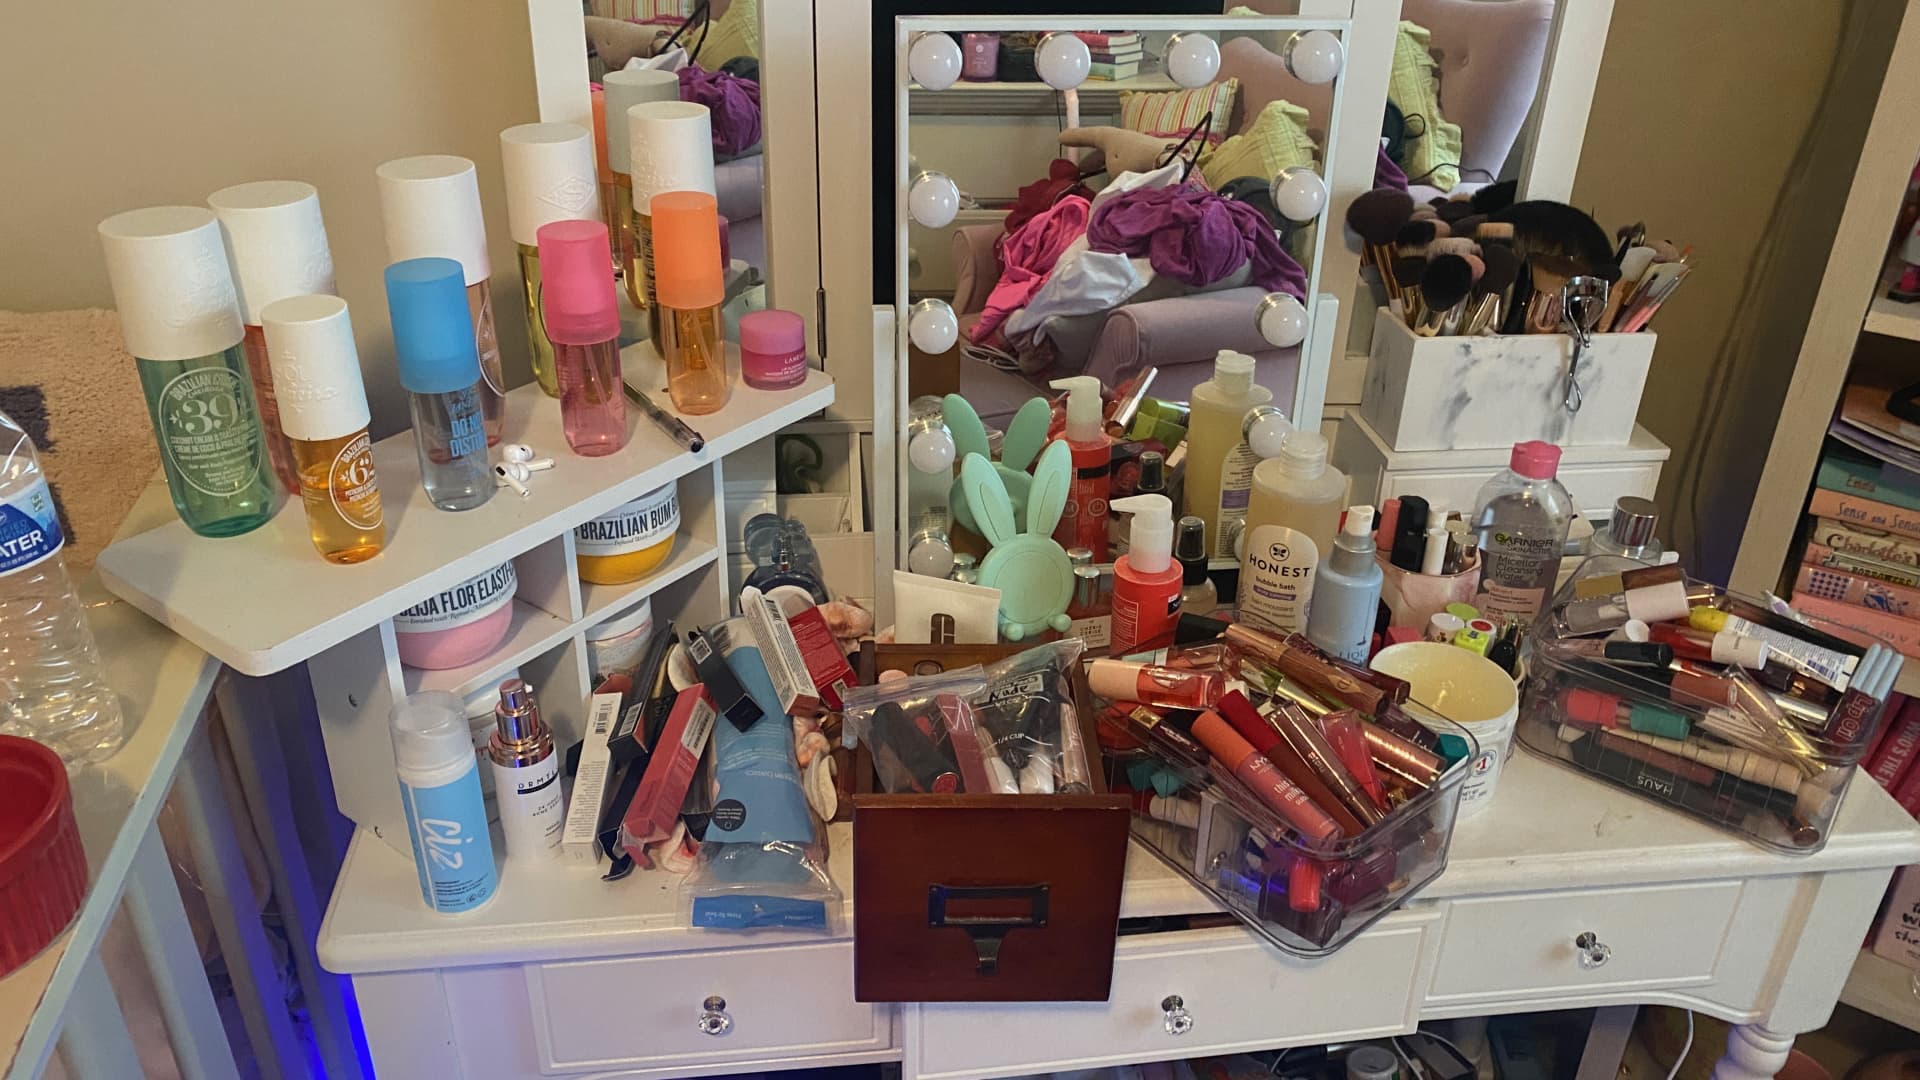 A photo of just some of the skincare products Rick Aaron's daughters are using.